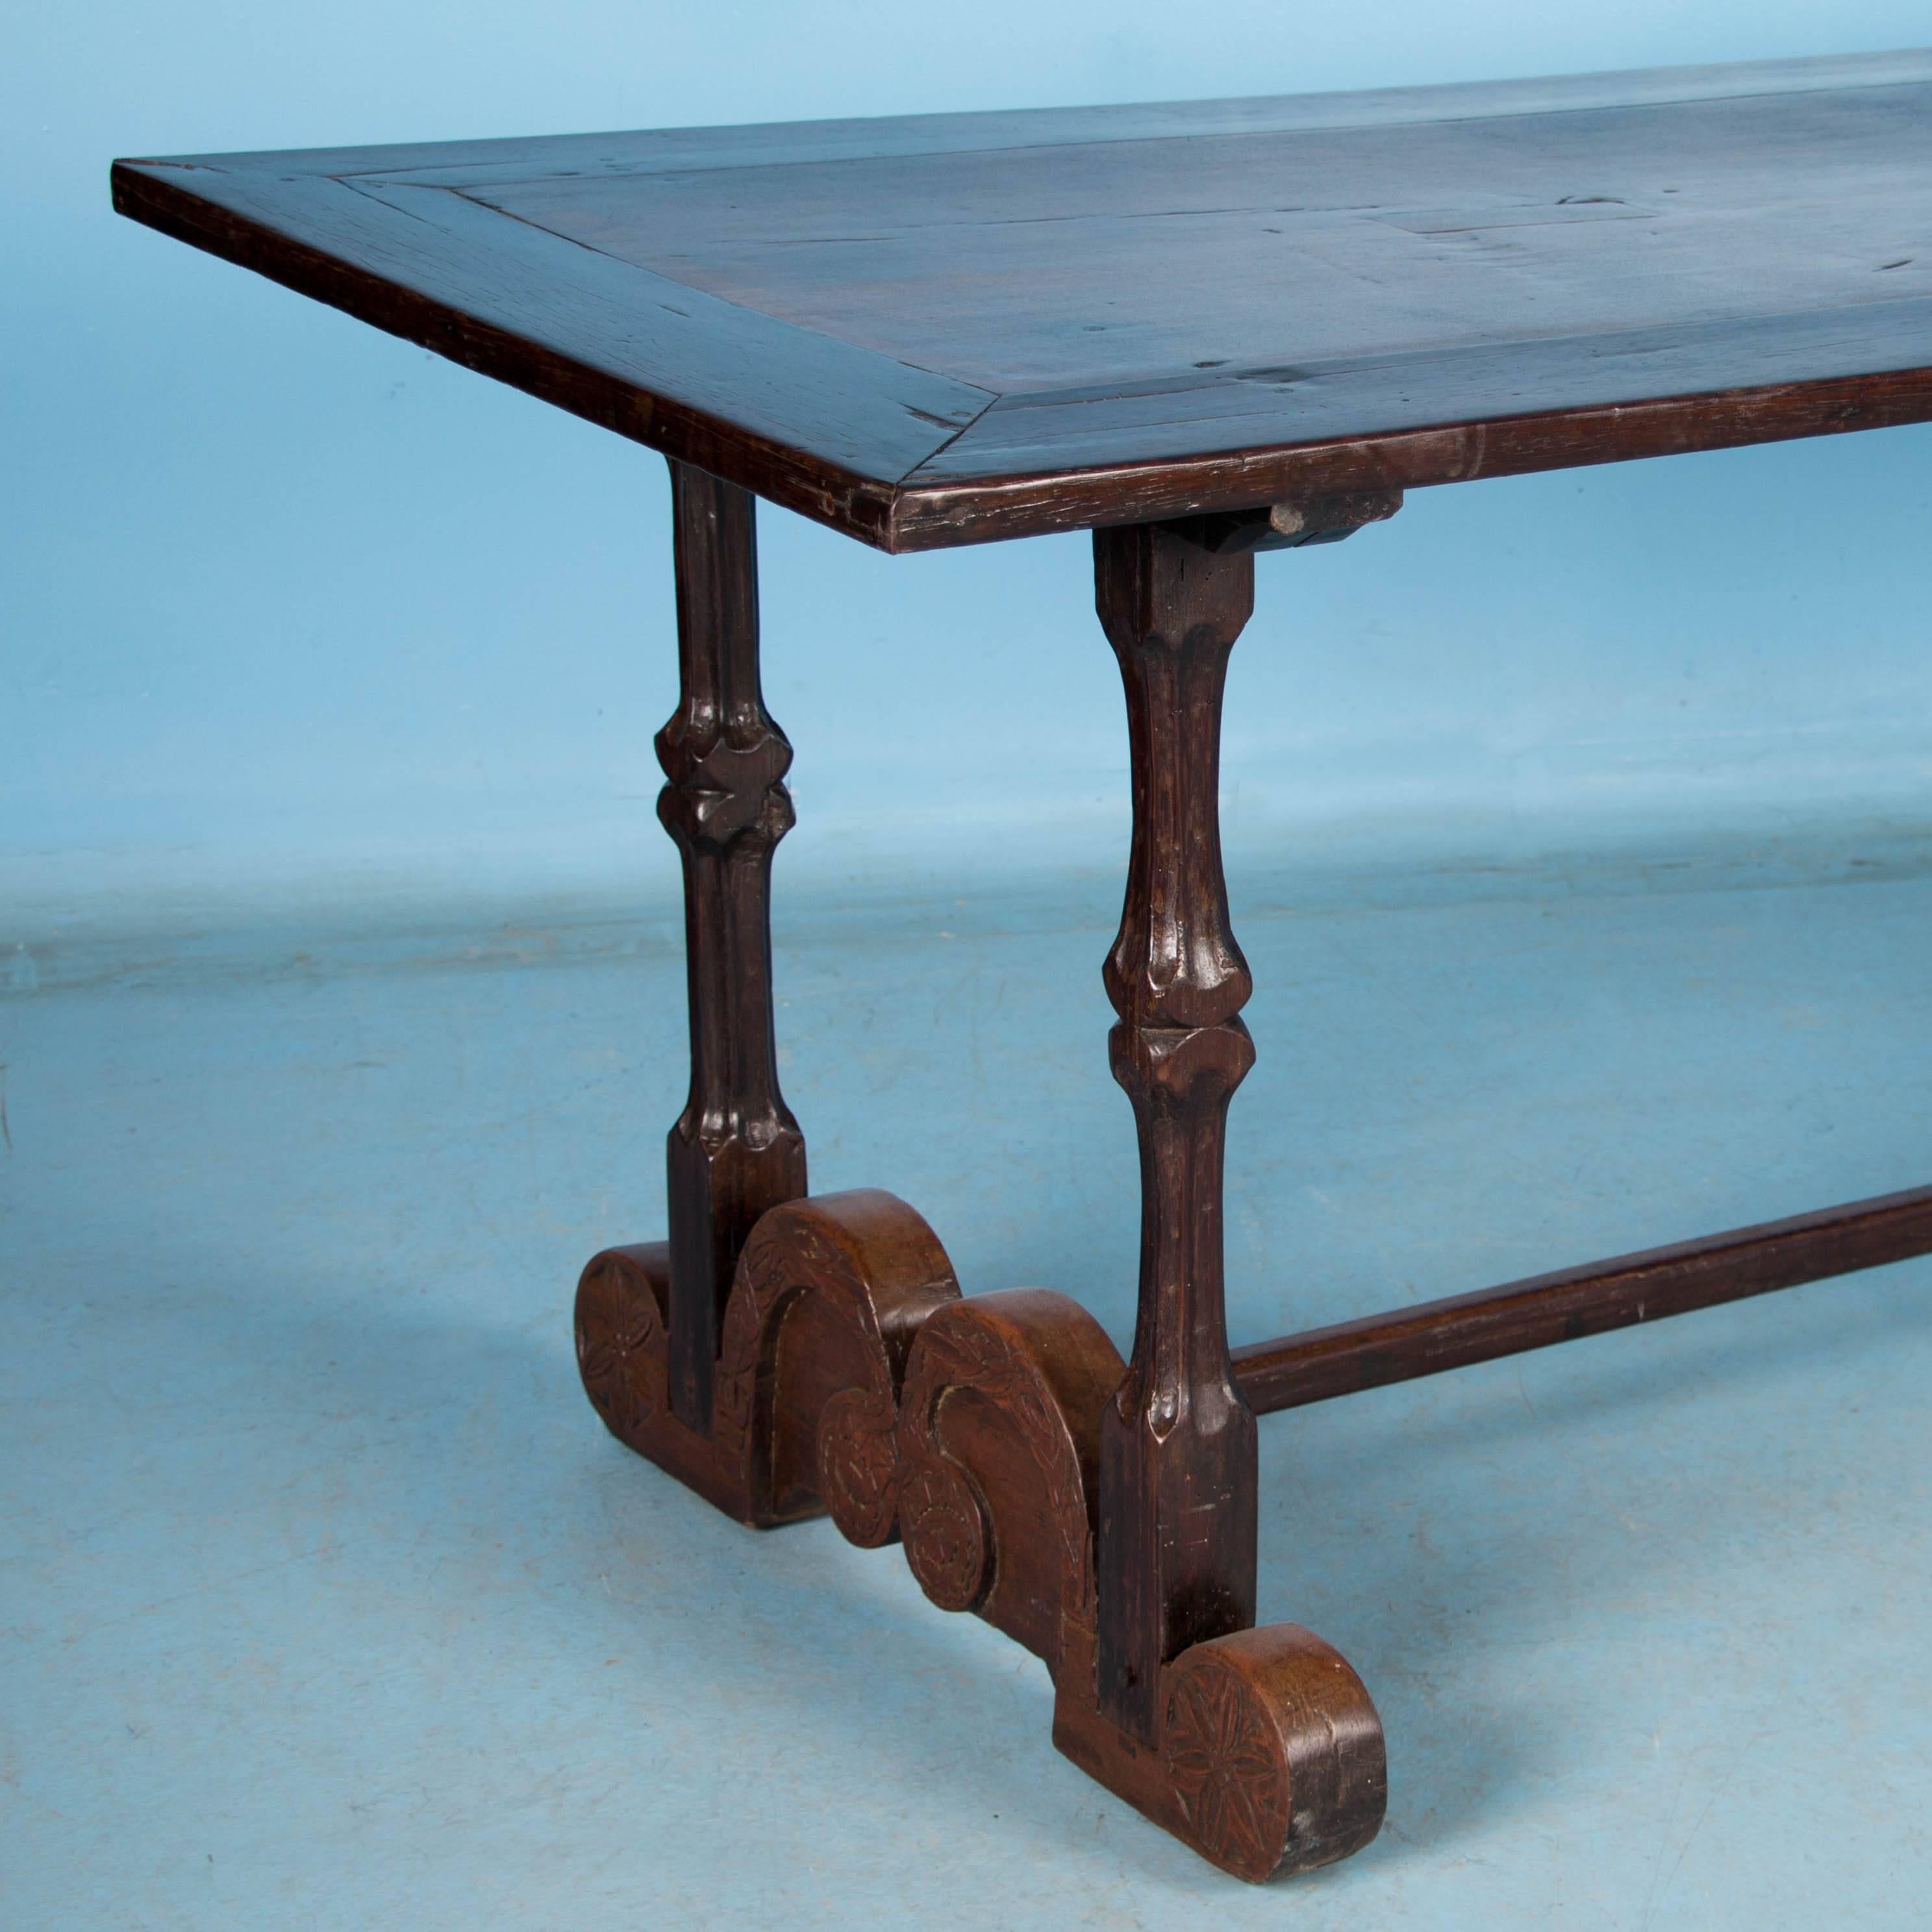 19th Century Antique Spanish Colonial Dining Table from the Philippines